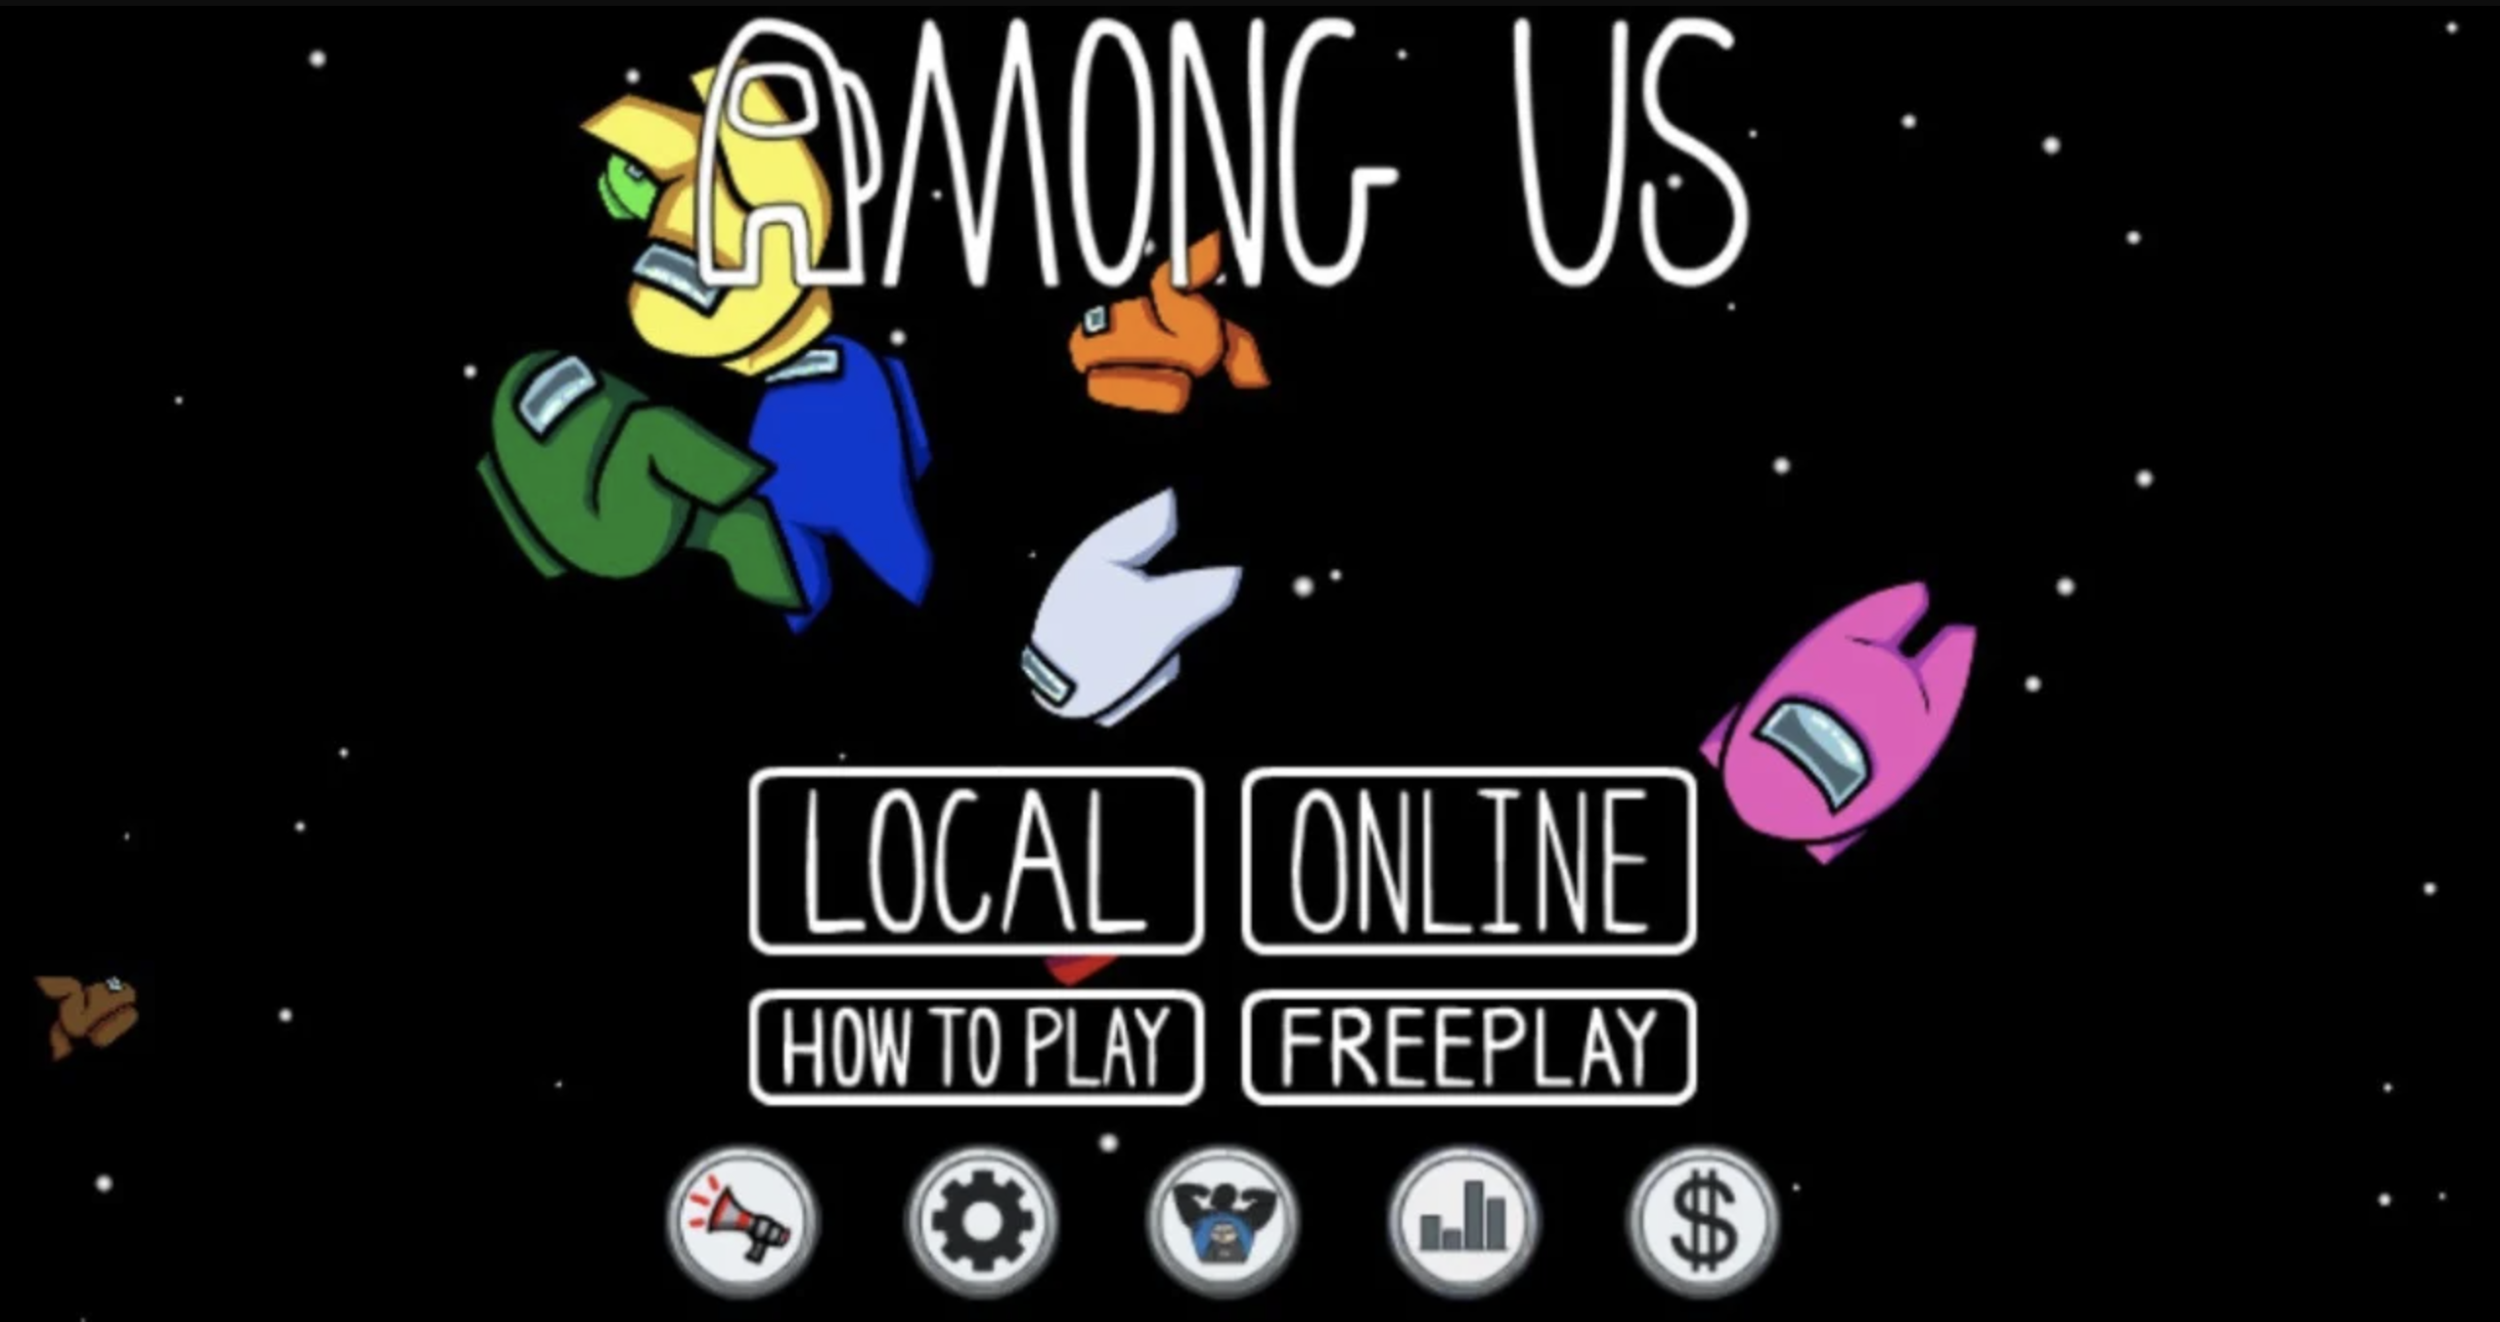 How To Play Among Us For Free - GameSpot